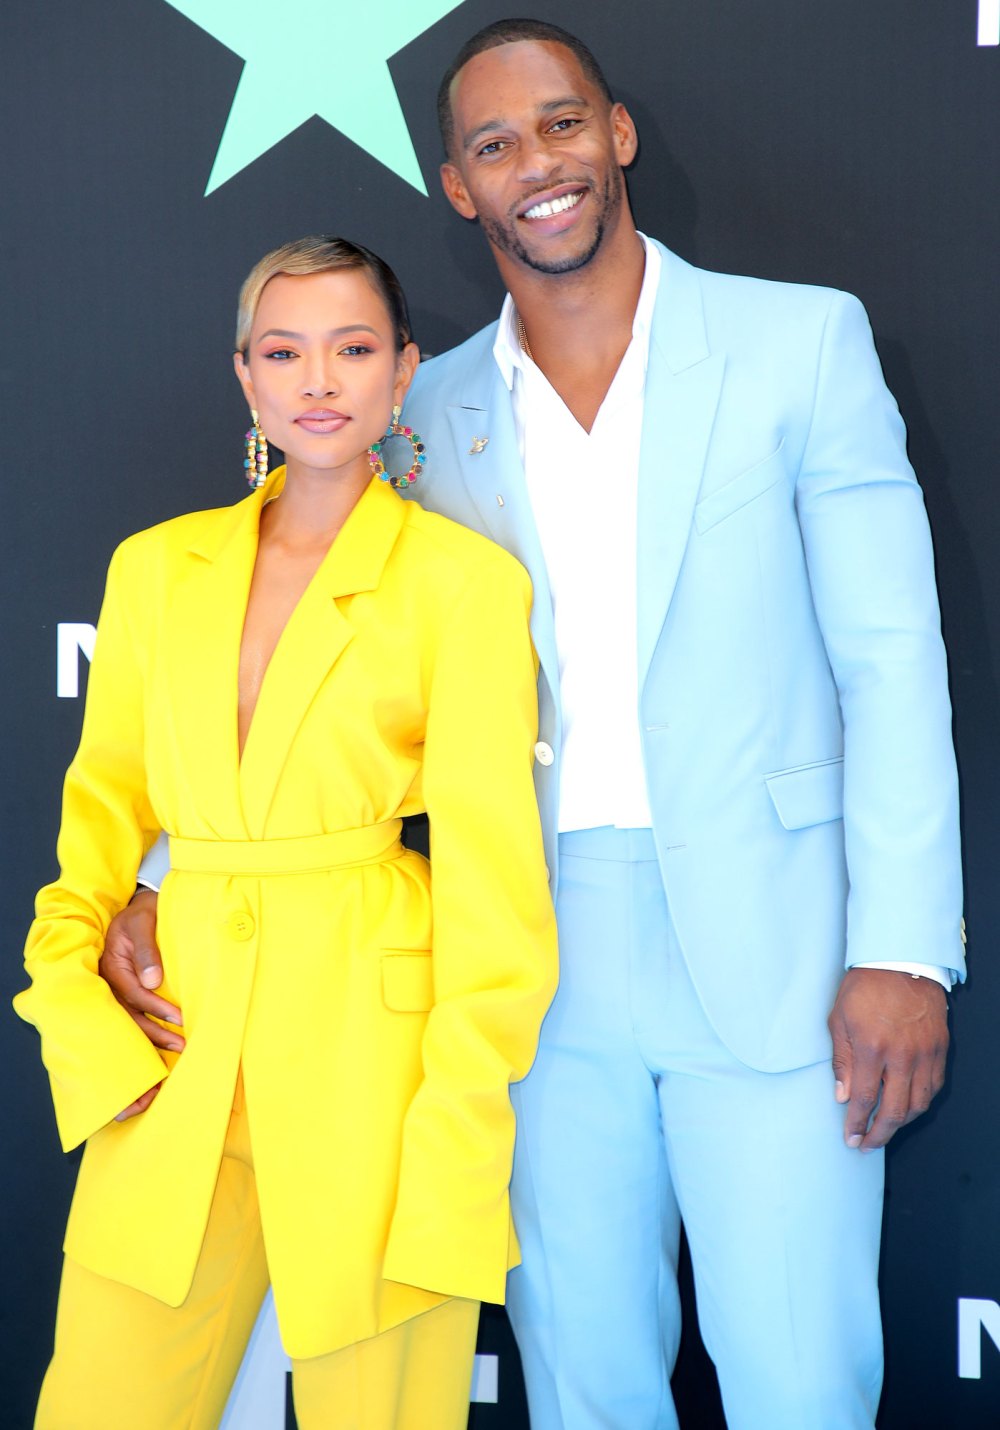 Karrueche-Tran-Yellow-Outfit-and-Victor-Cruz-Baby-Blue-Jacket-and-Pants-BET-Awards